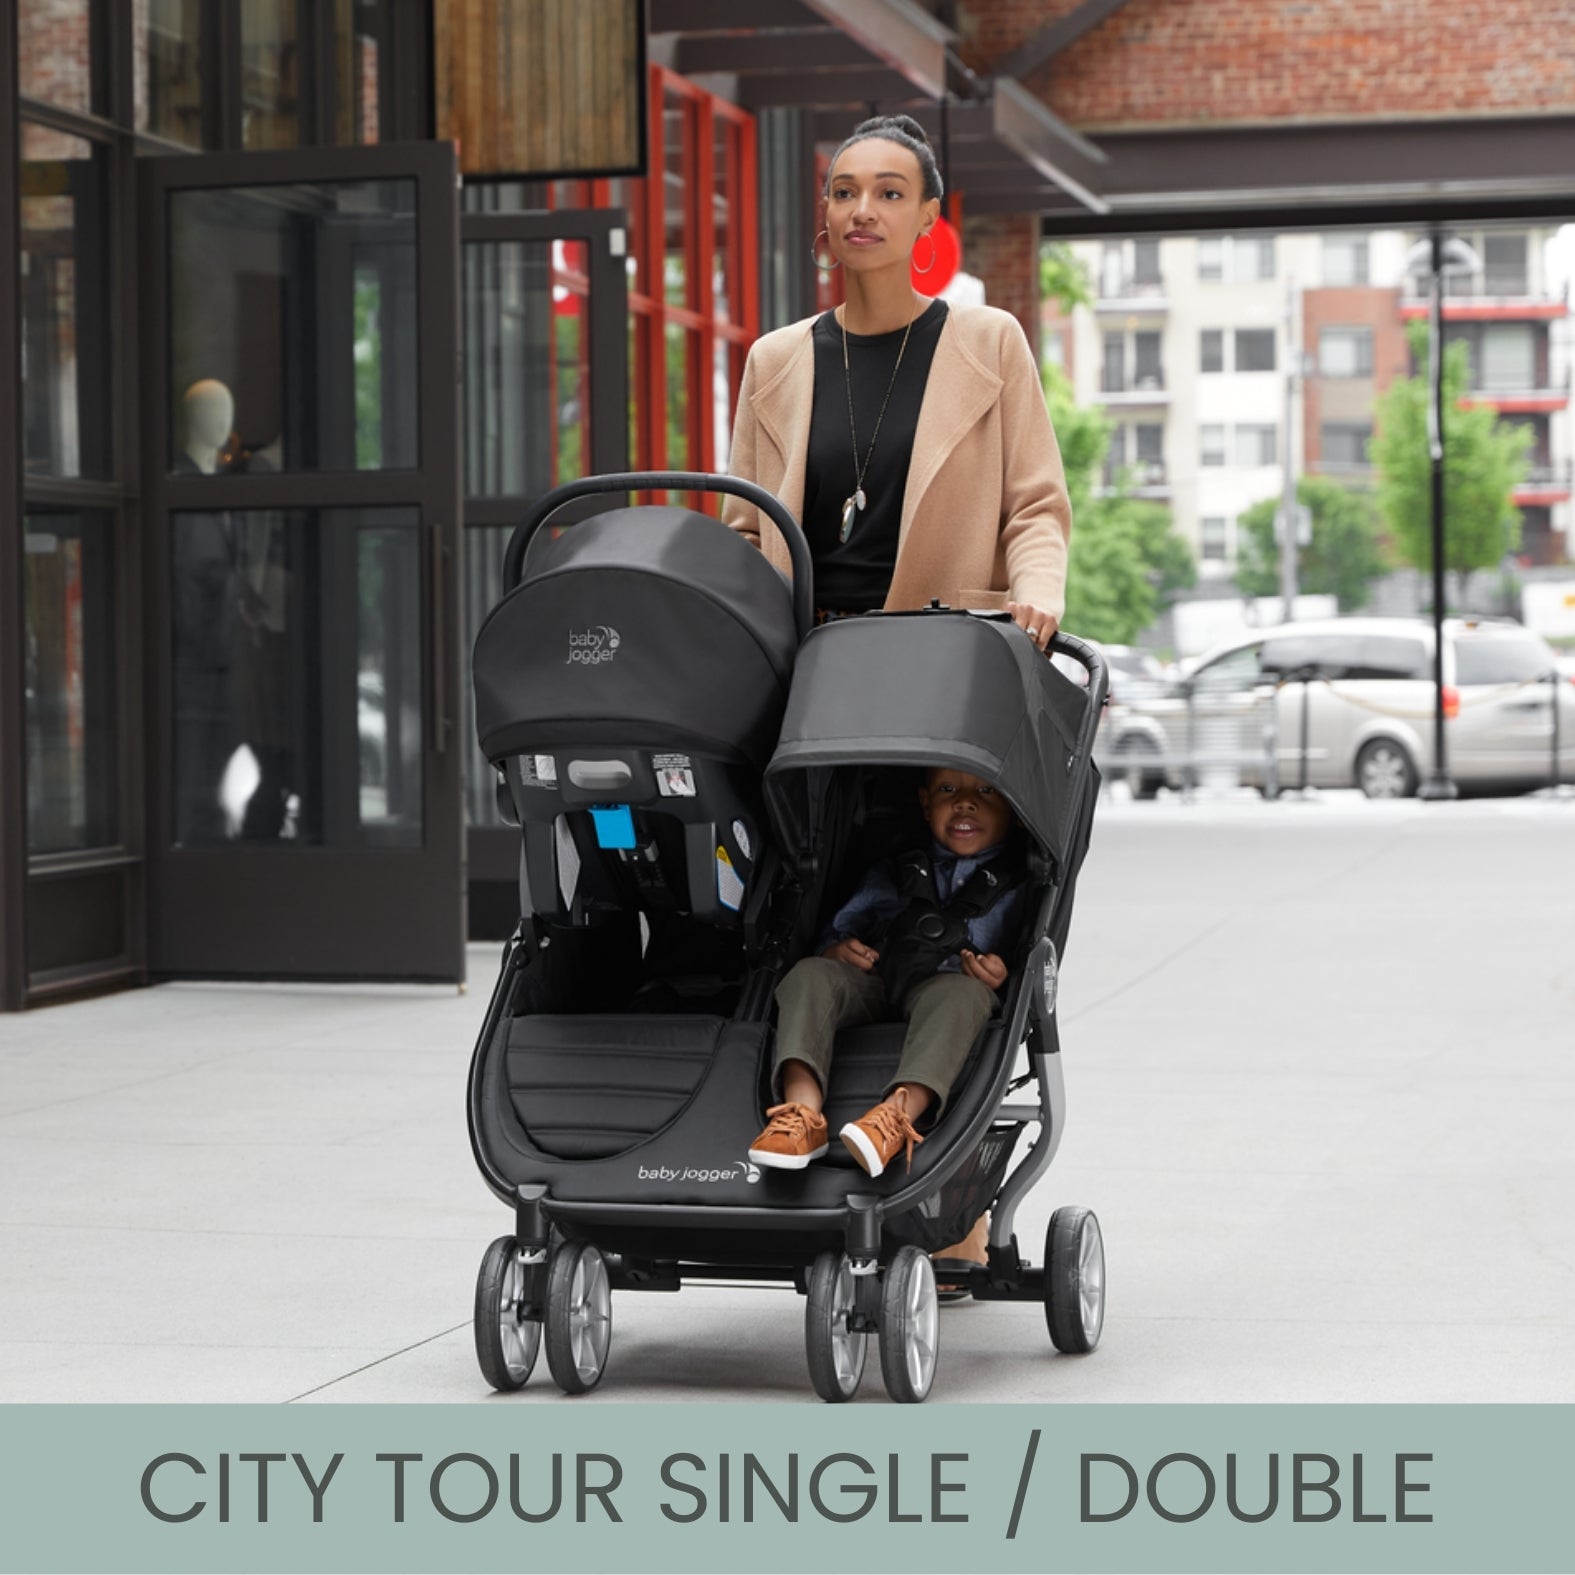 Car seats compatible with Baby Jogger City Tour Stroller